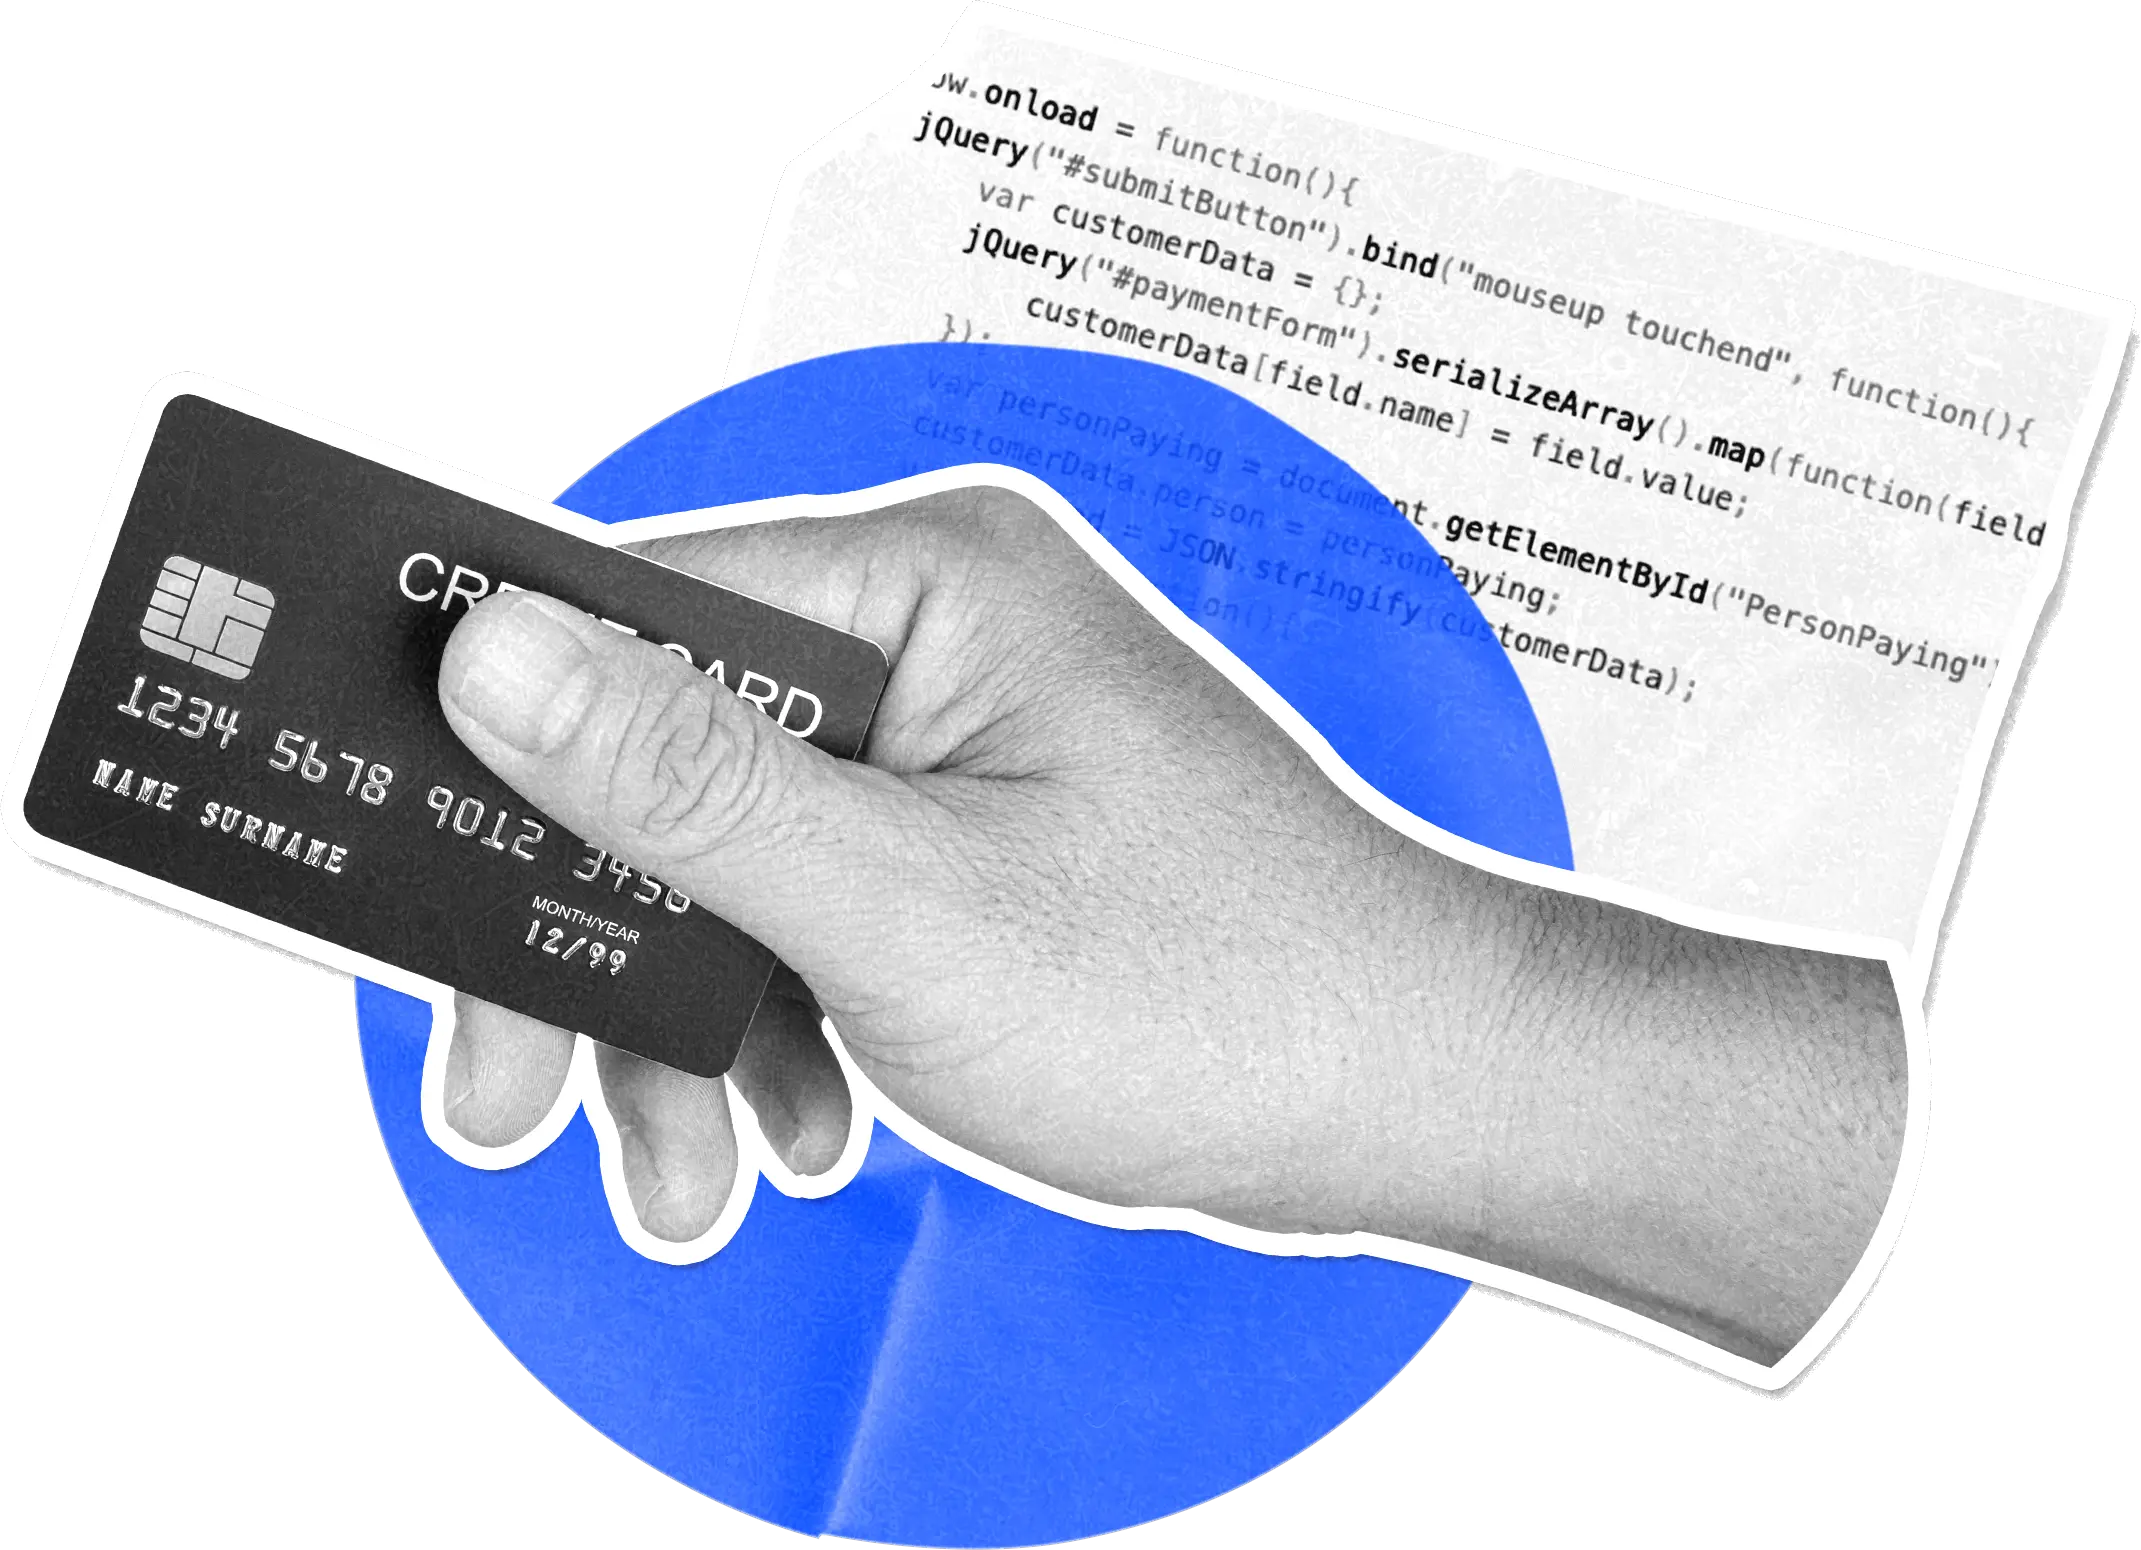 A hand holding a credit card, on top of a paper cutout of the script that executed the attack on British Airways